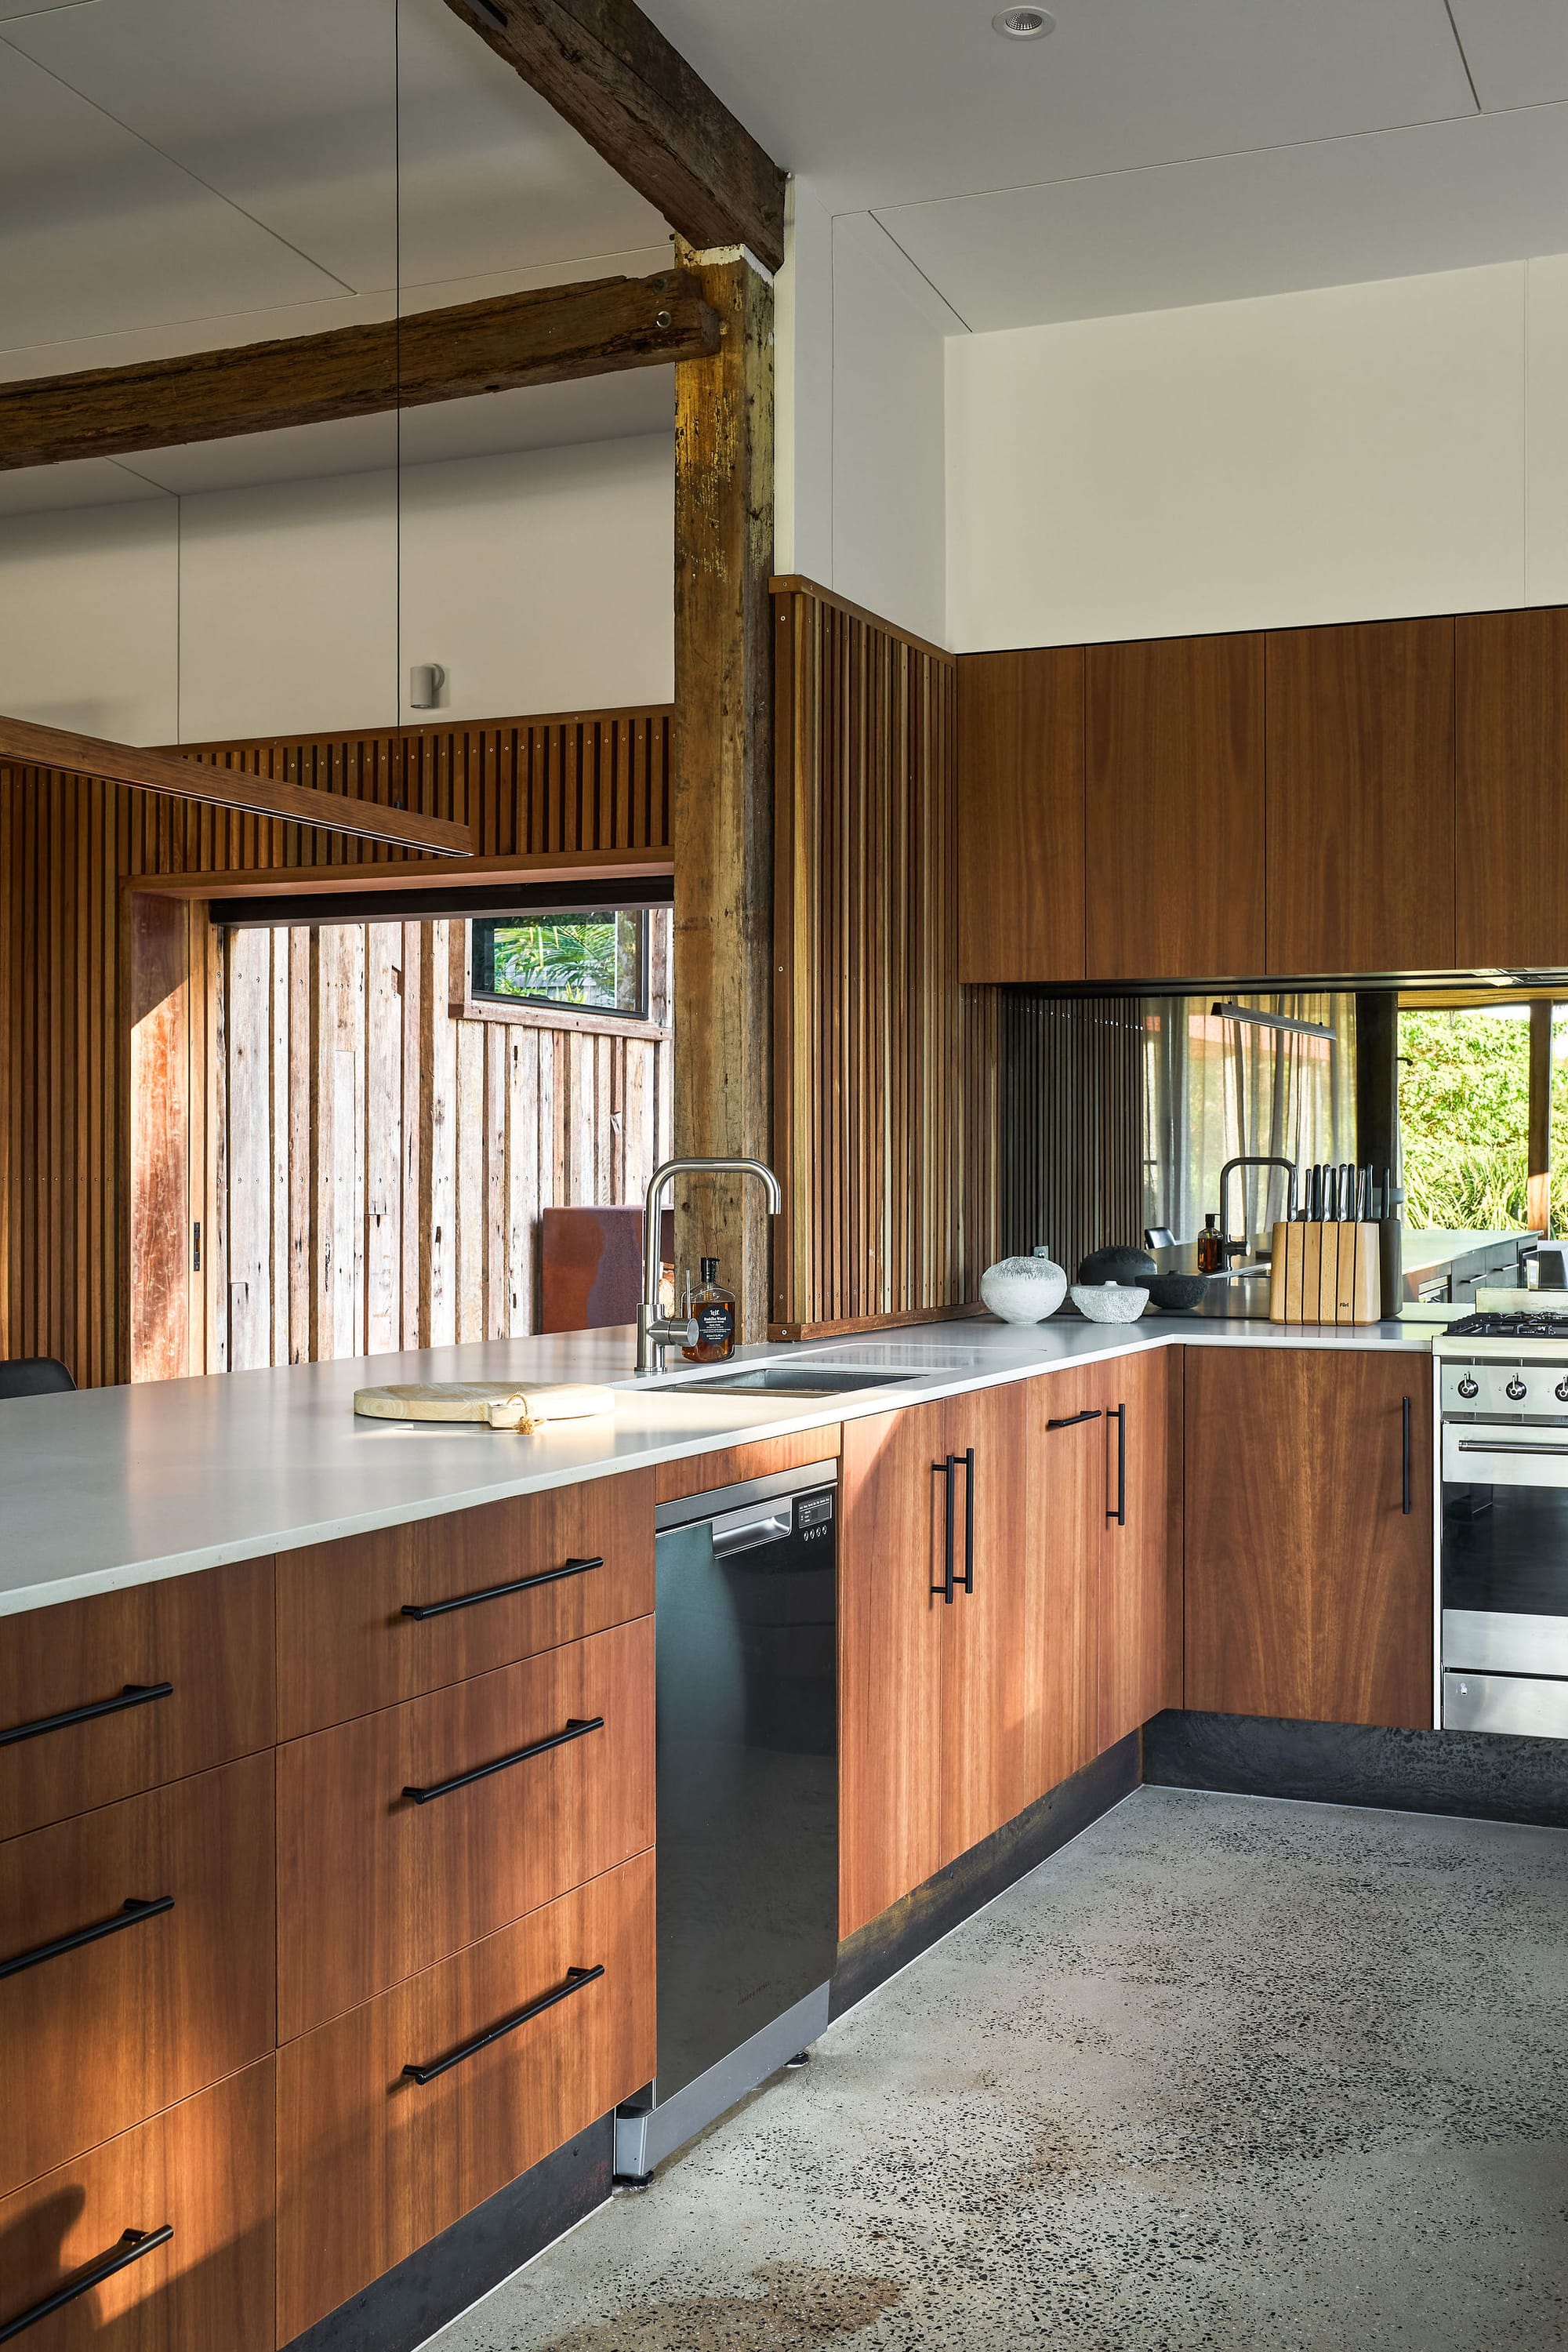 Rockpool Farm Byron Bay. Photography by Andy Macpherson. Timber veneer kitchen counters and polished concrete floors. Timber clad walls. White countertops. Exposed timber beams below white ceiling. 